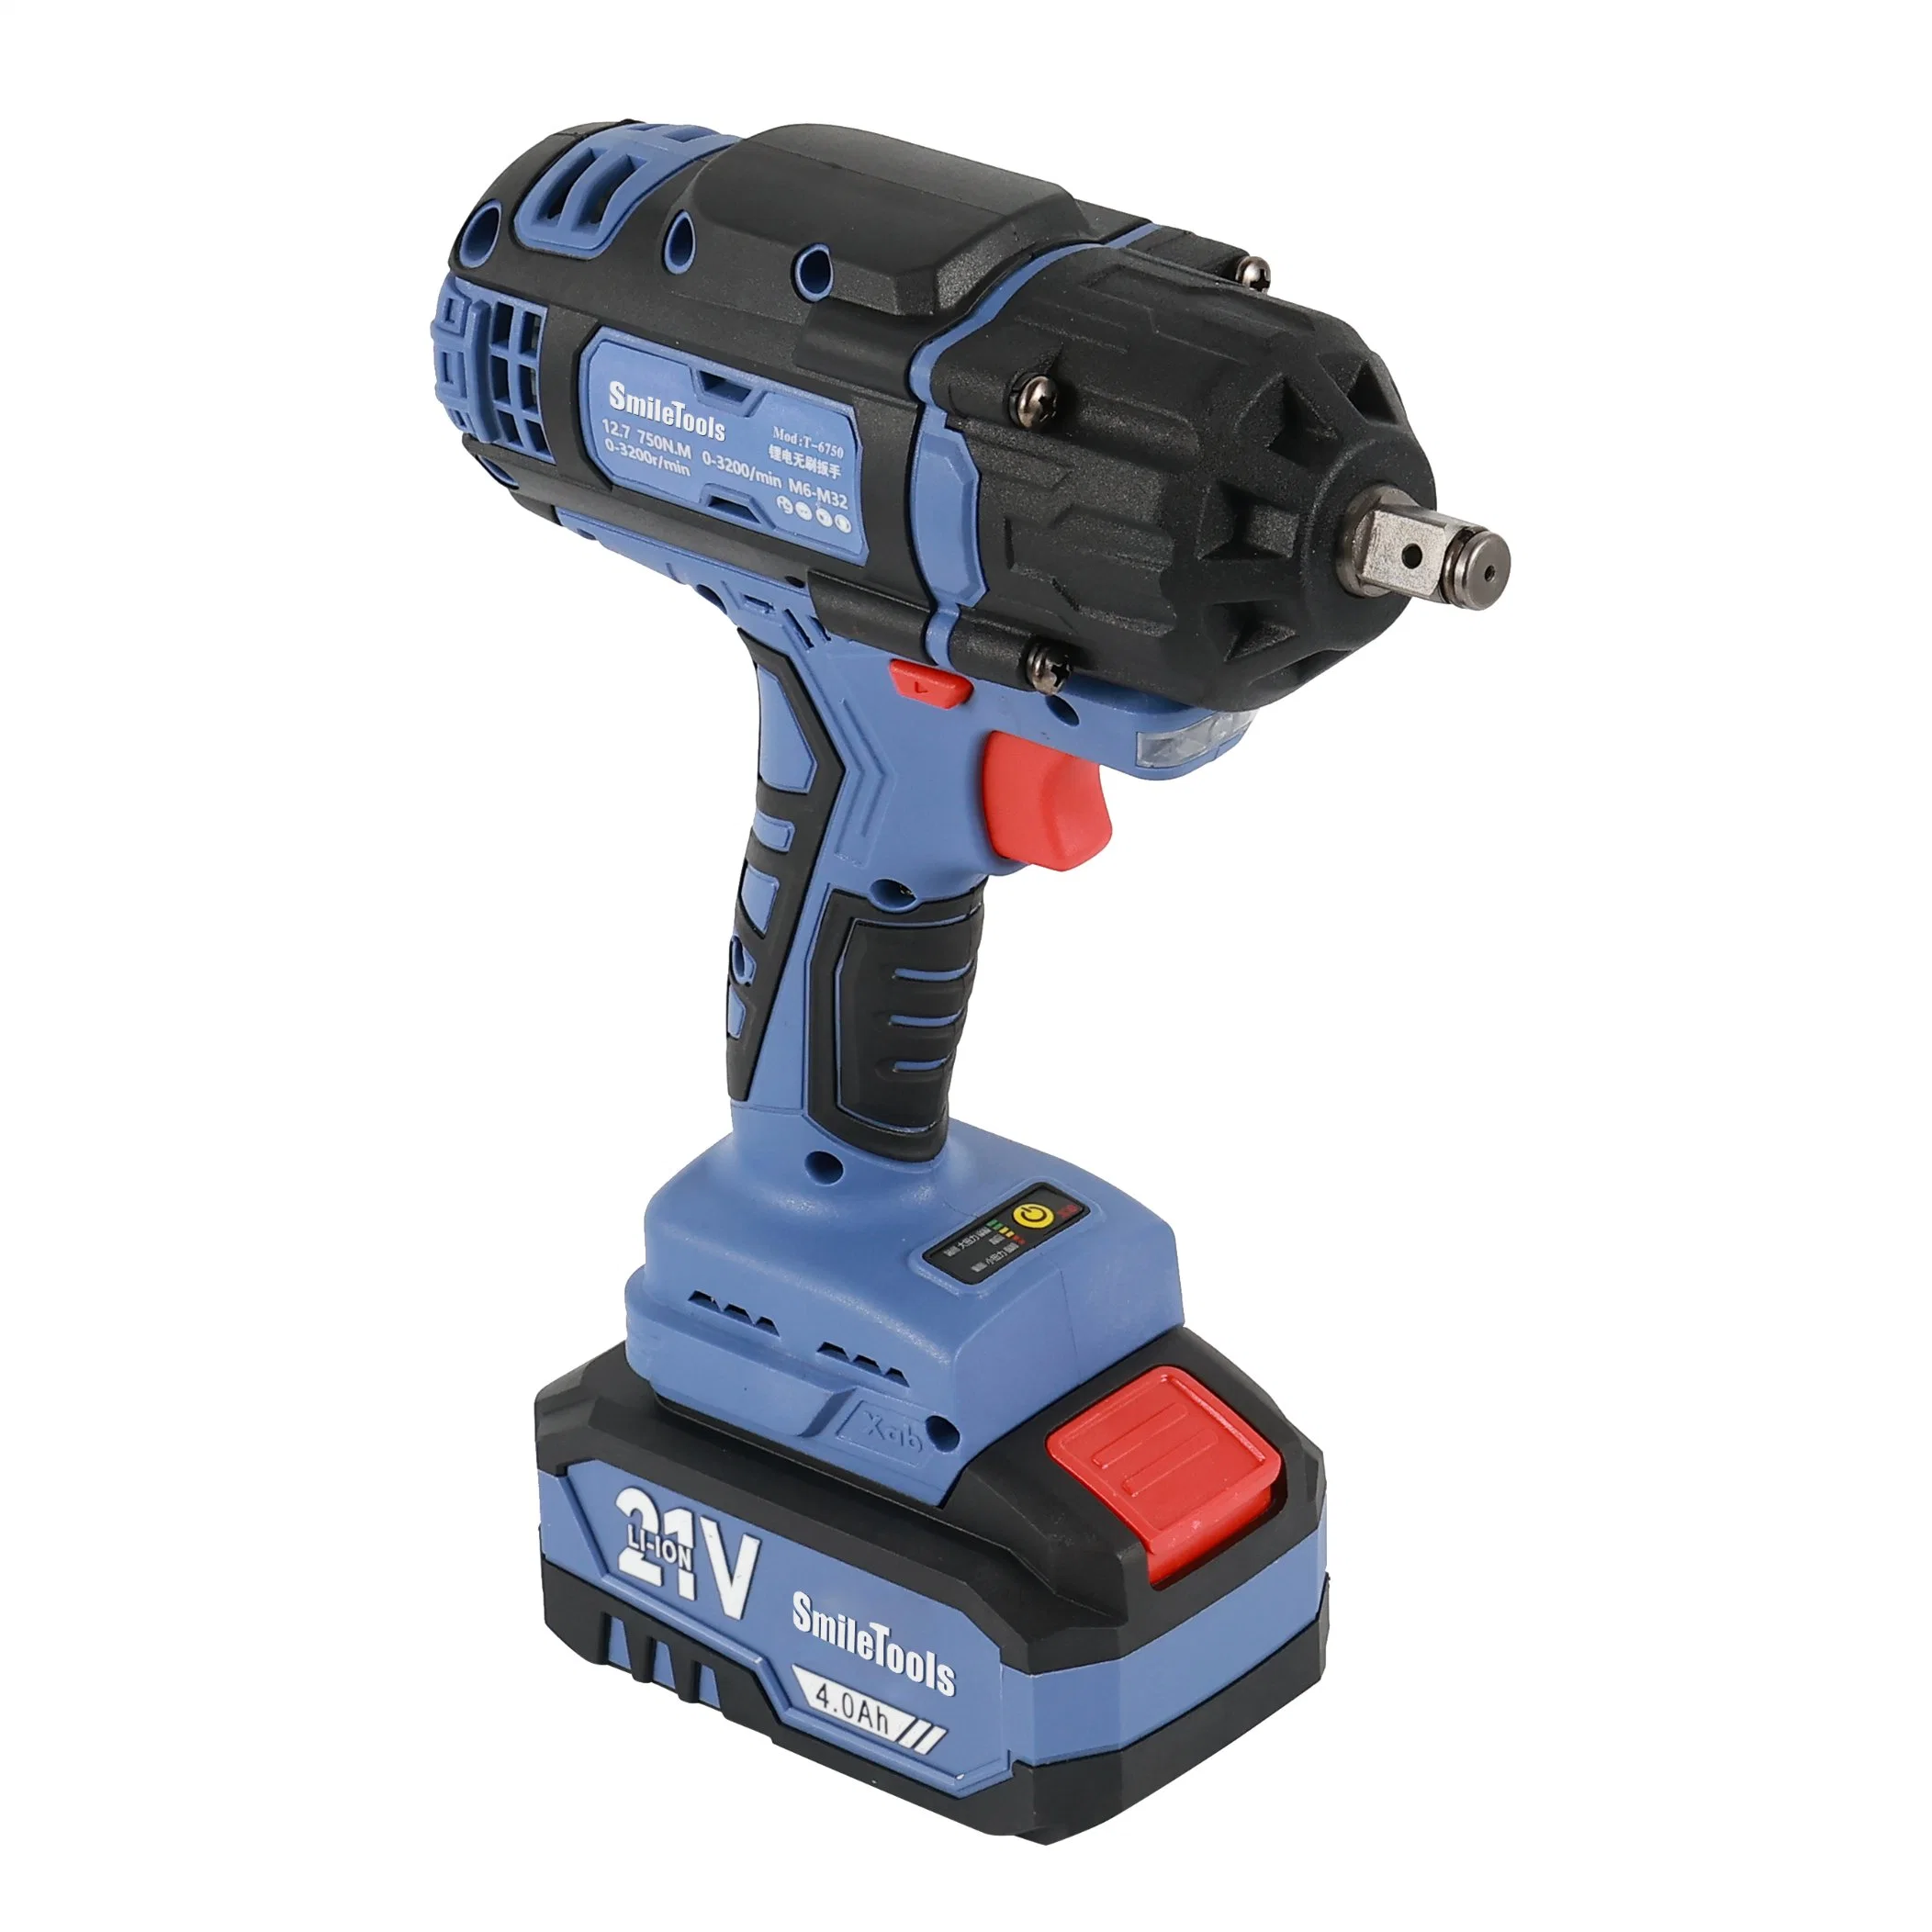 21V Cordless Lithium Battery Electric Impact Wrench Driver Ferramentas Herramientas Electrica Cle a Choc Power Wrenches Tools